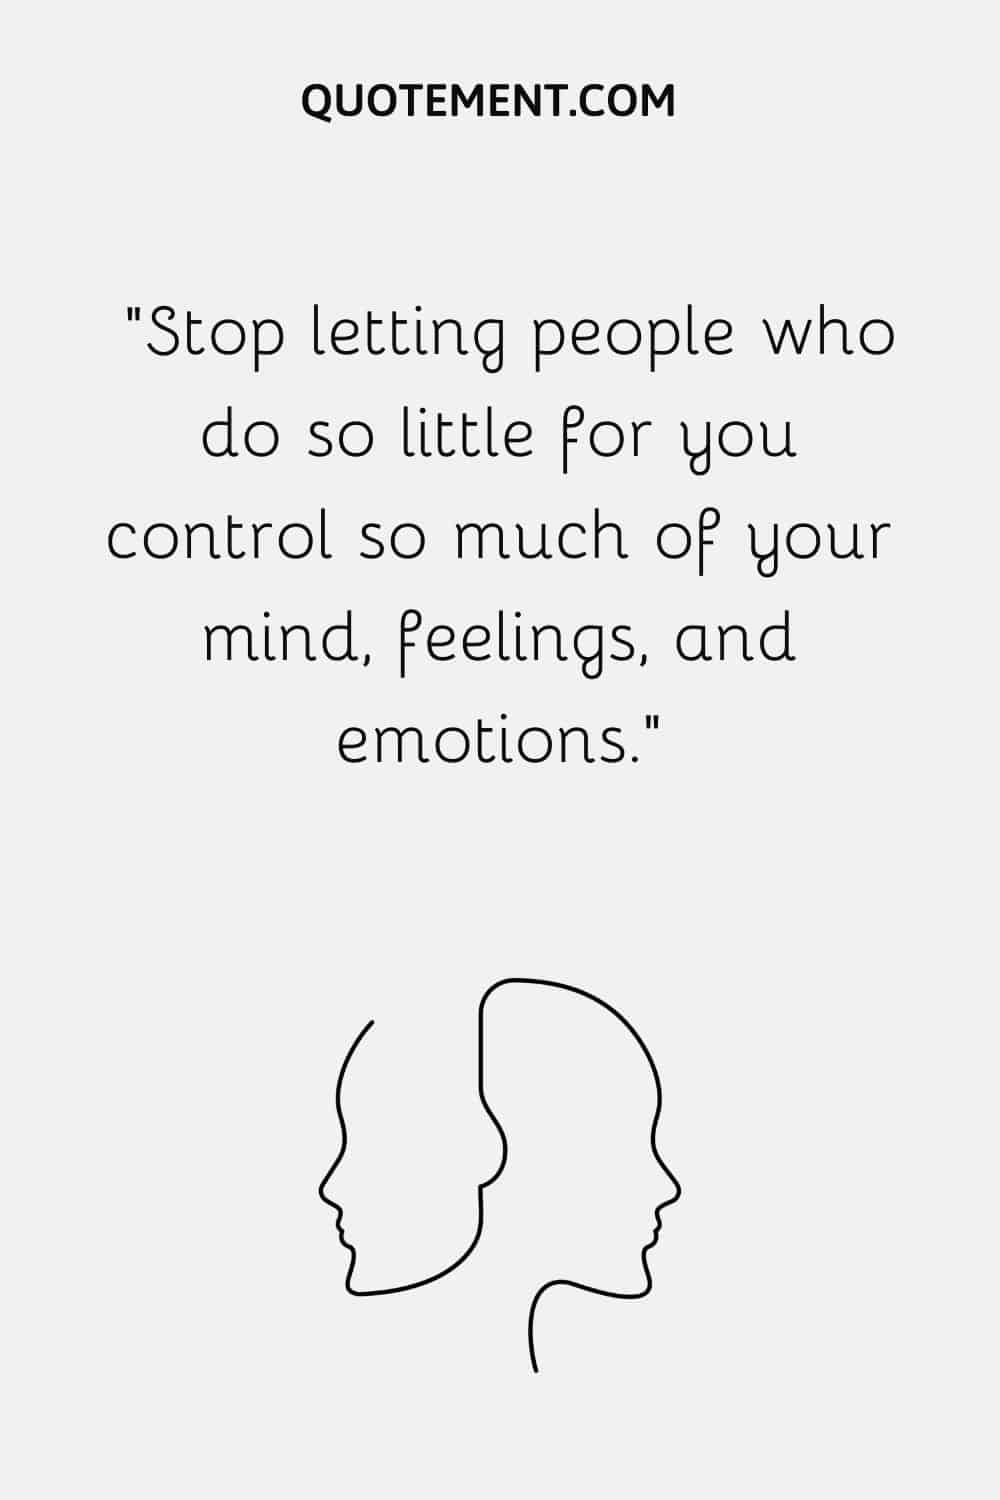 Stop letting people who do so little for you control so much of your mind, feelings, and emotions